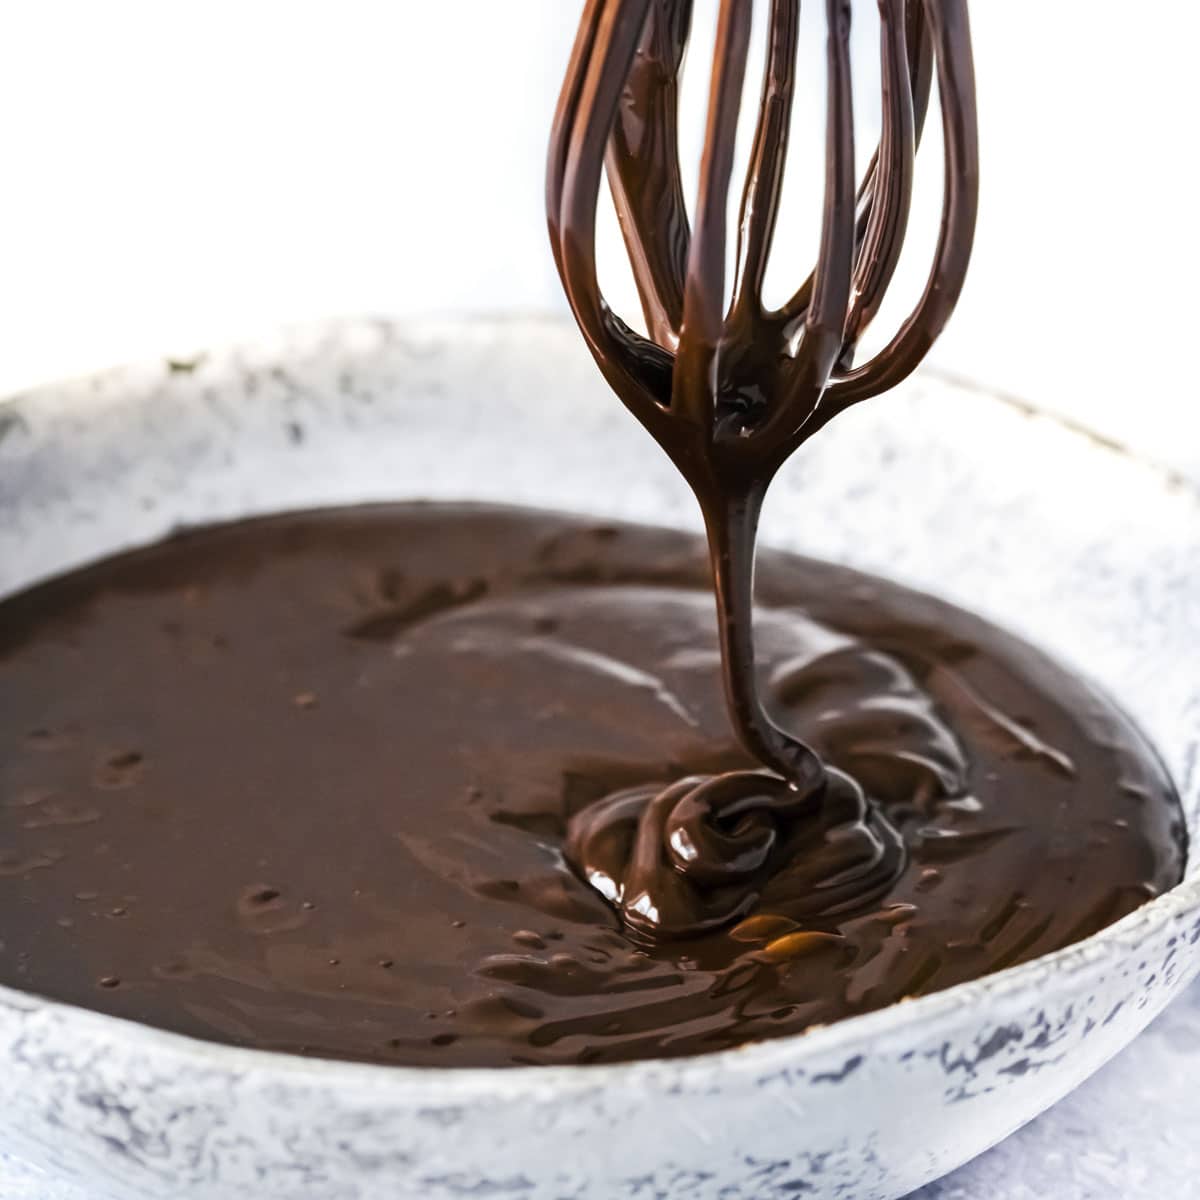 chocolate ganache dripping from a whisk